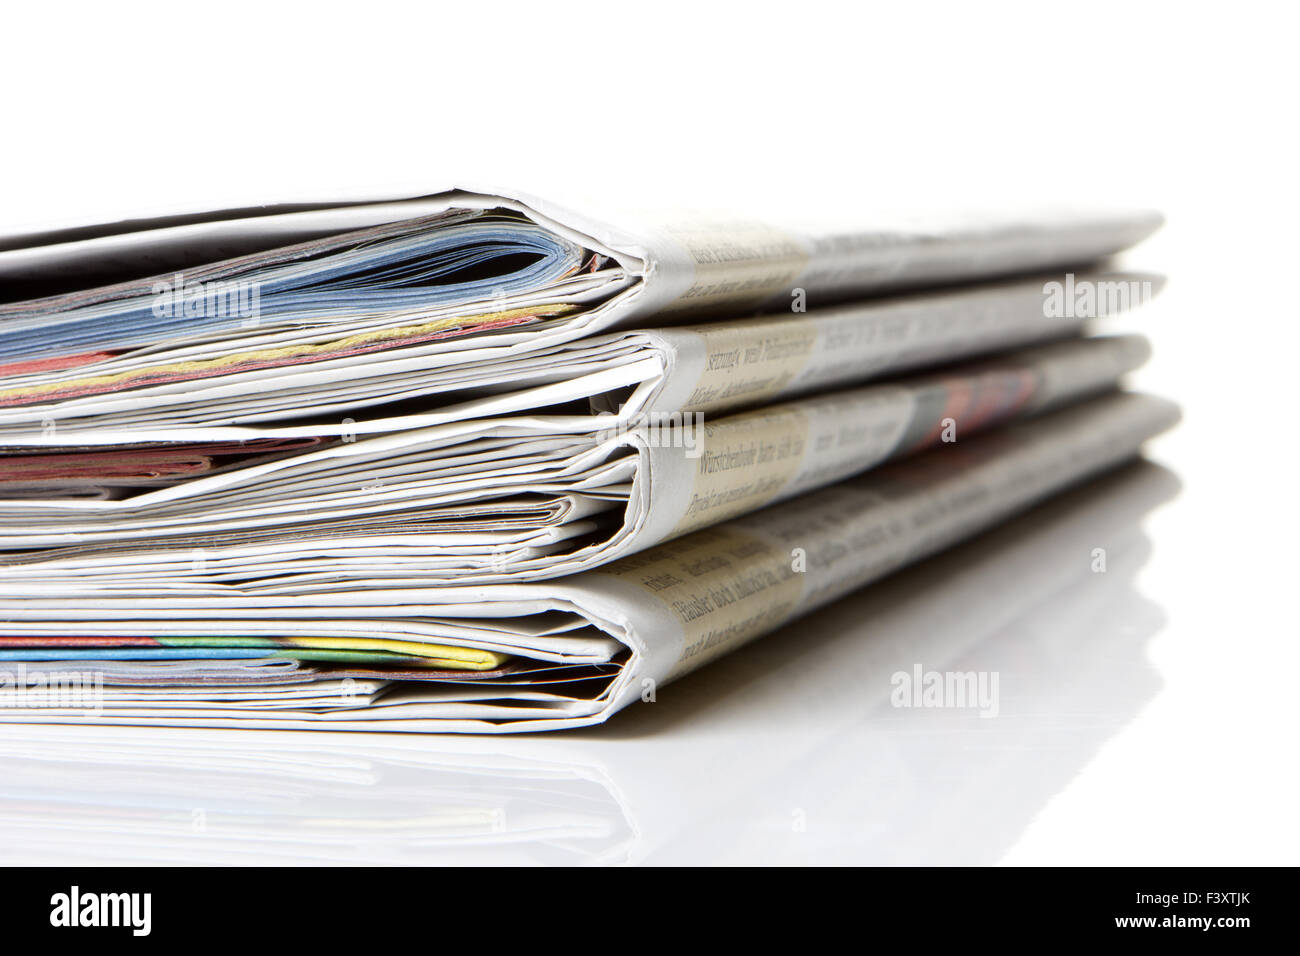 several newspapers, journals stacked Stock Photo